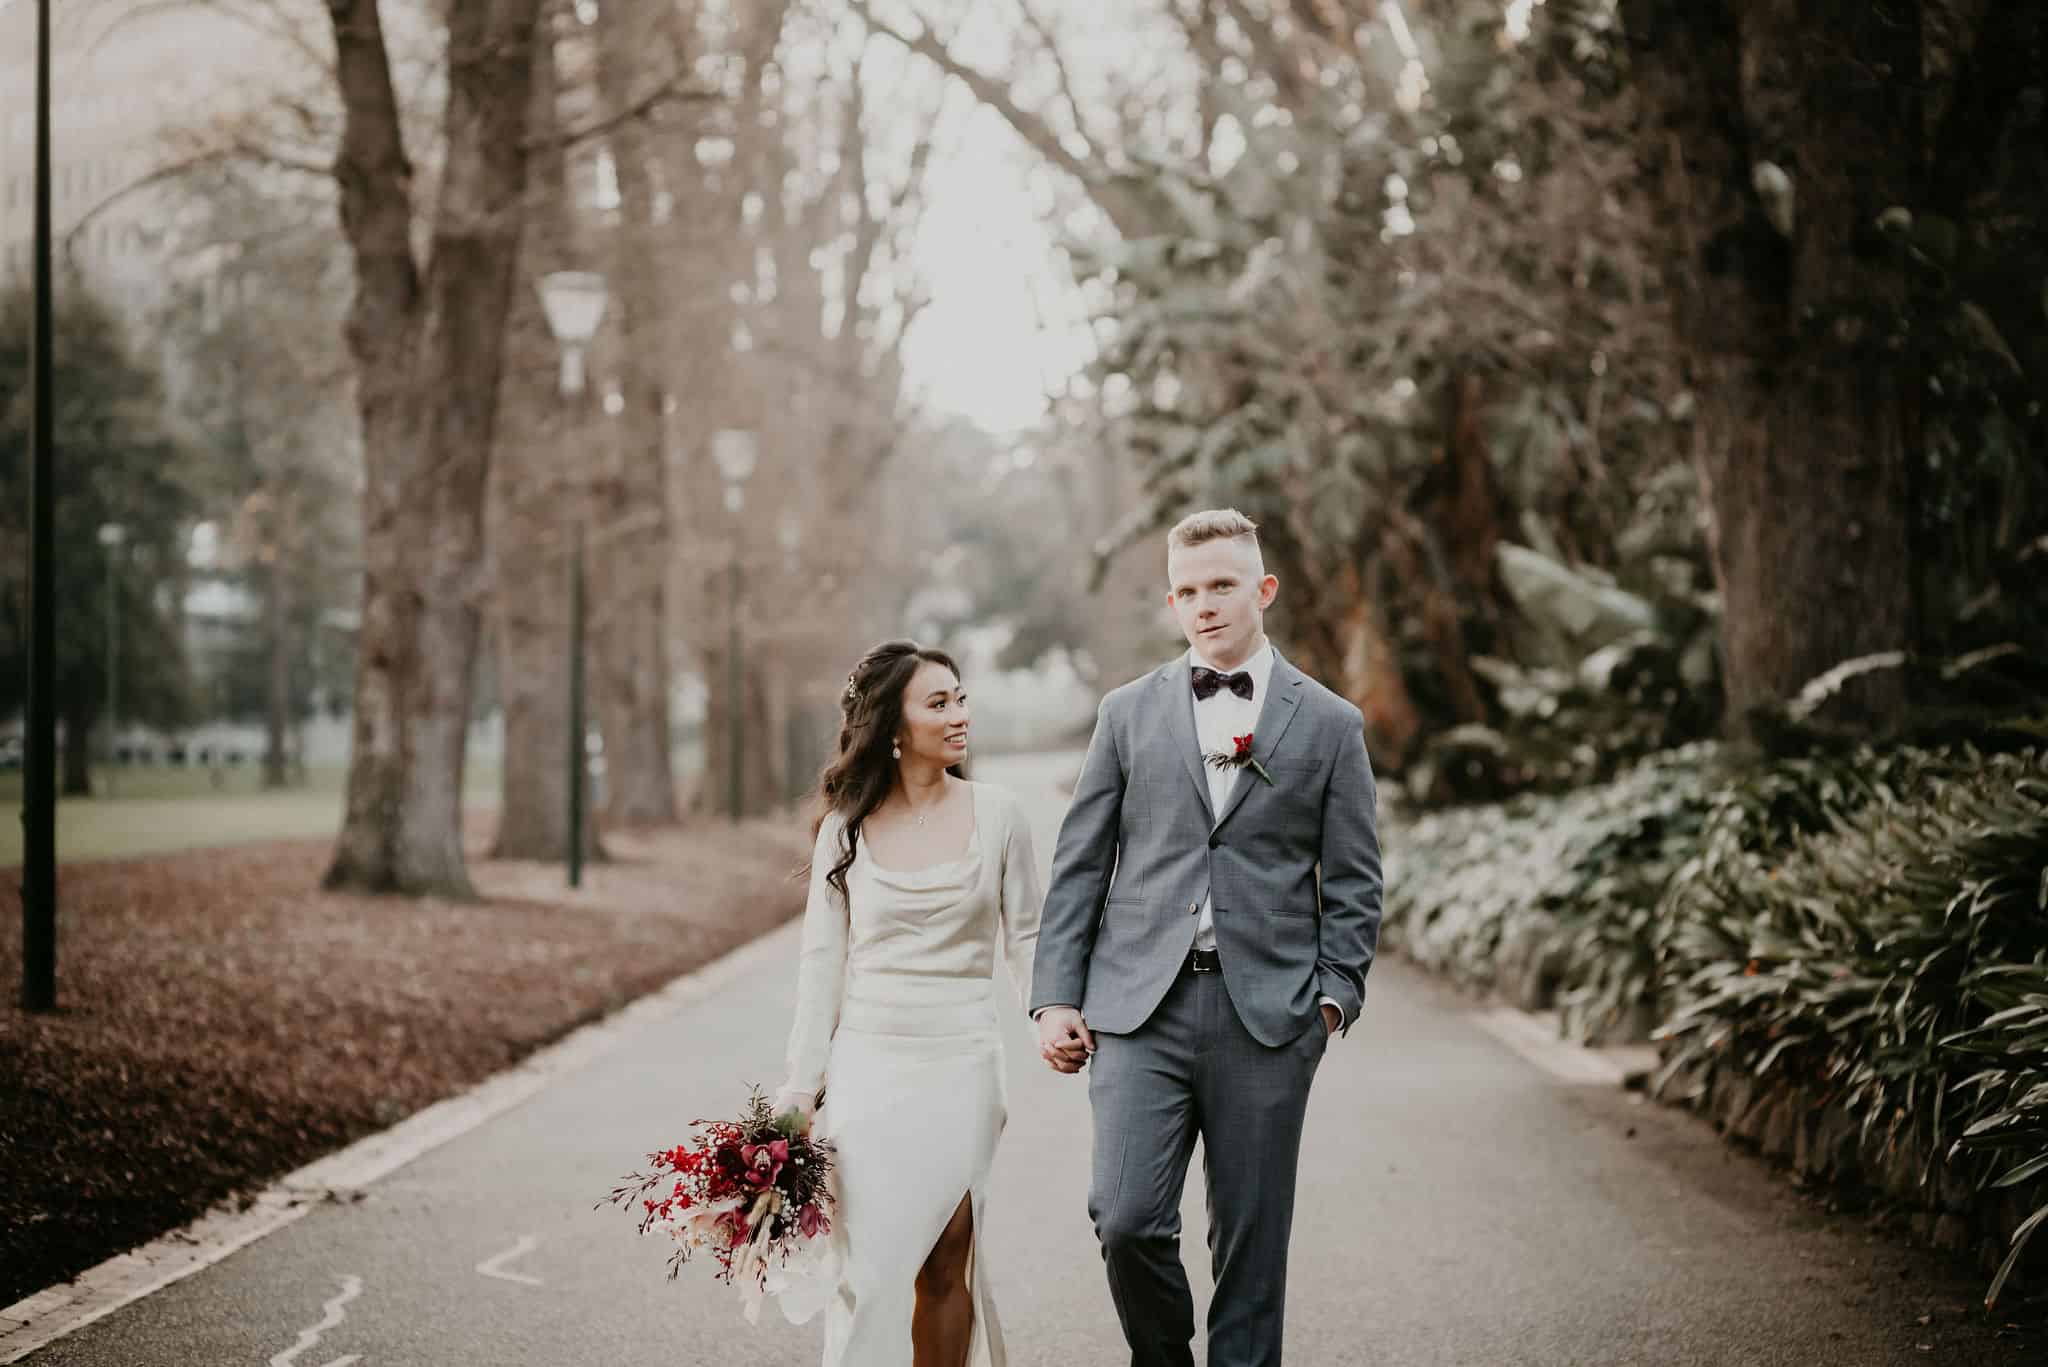 Bride and groom walking through park on a winters day after beautiful ceremony with Let's Elope Melbourne celebrant photography elopement package Victoria Sarah Matler Photography Fitzroy Gardens city wedding photos